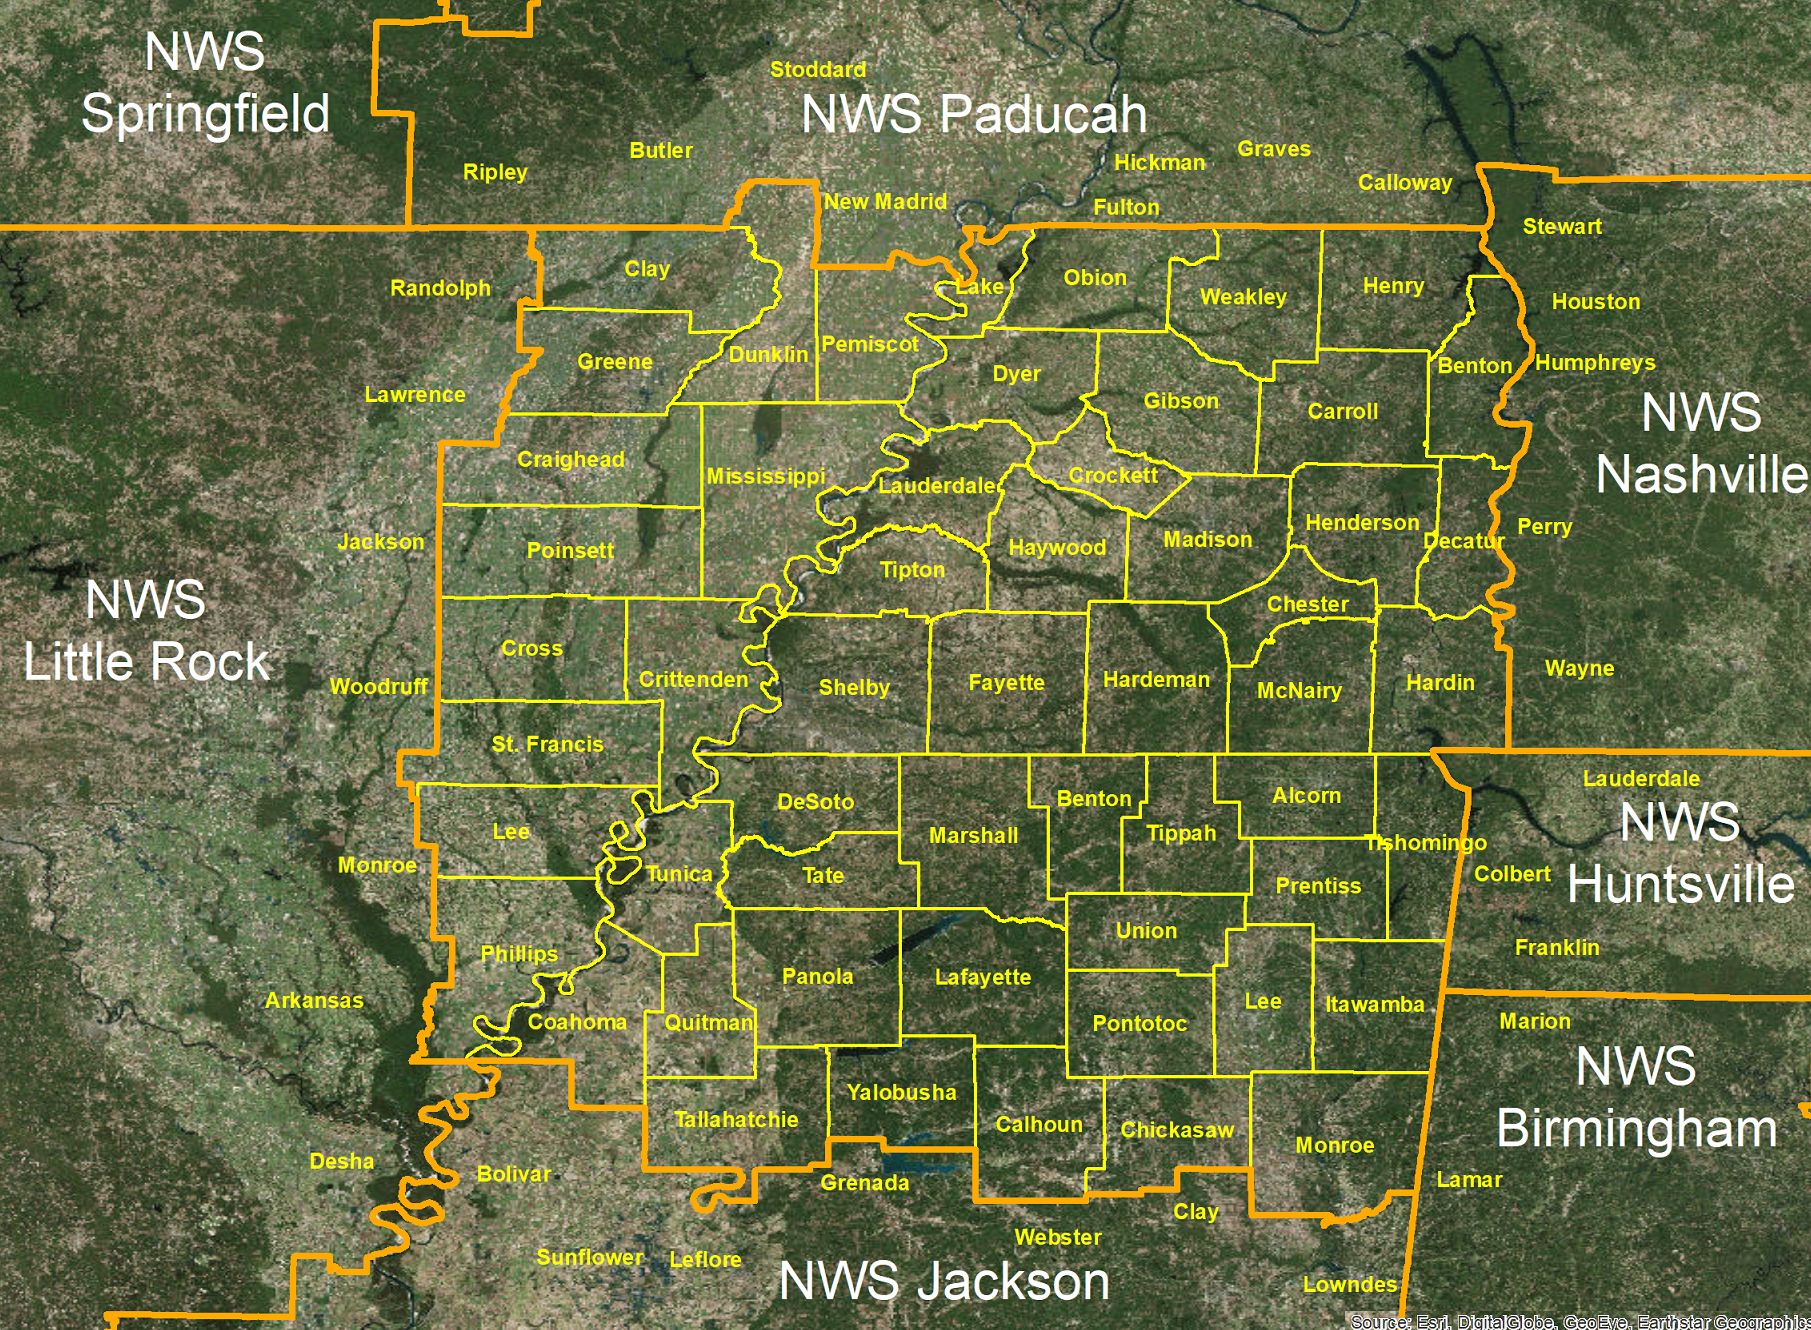 NWS Memphis County Warning and Forecast Area - Click to Enlarge